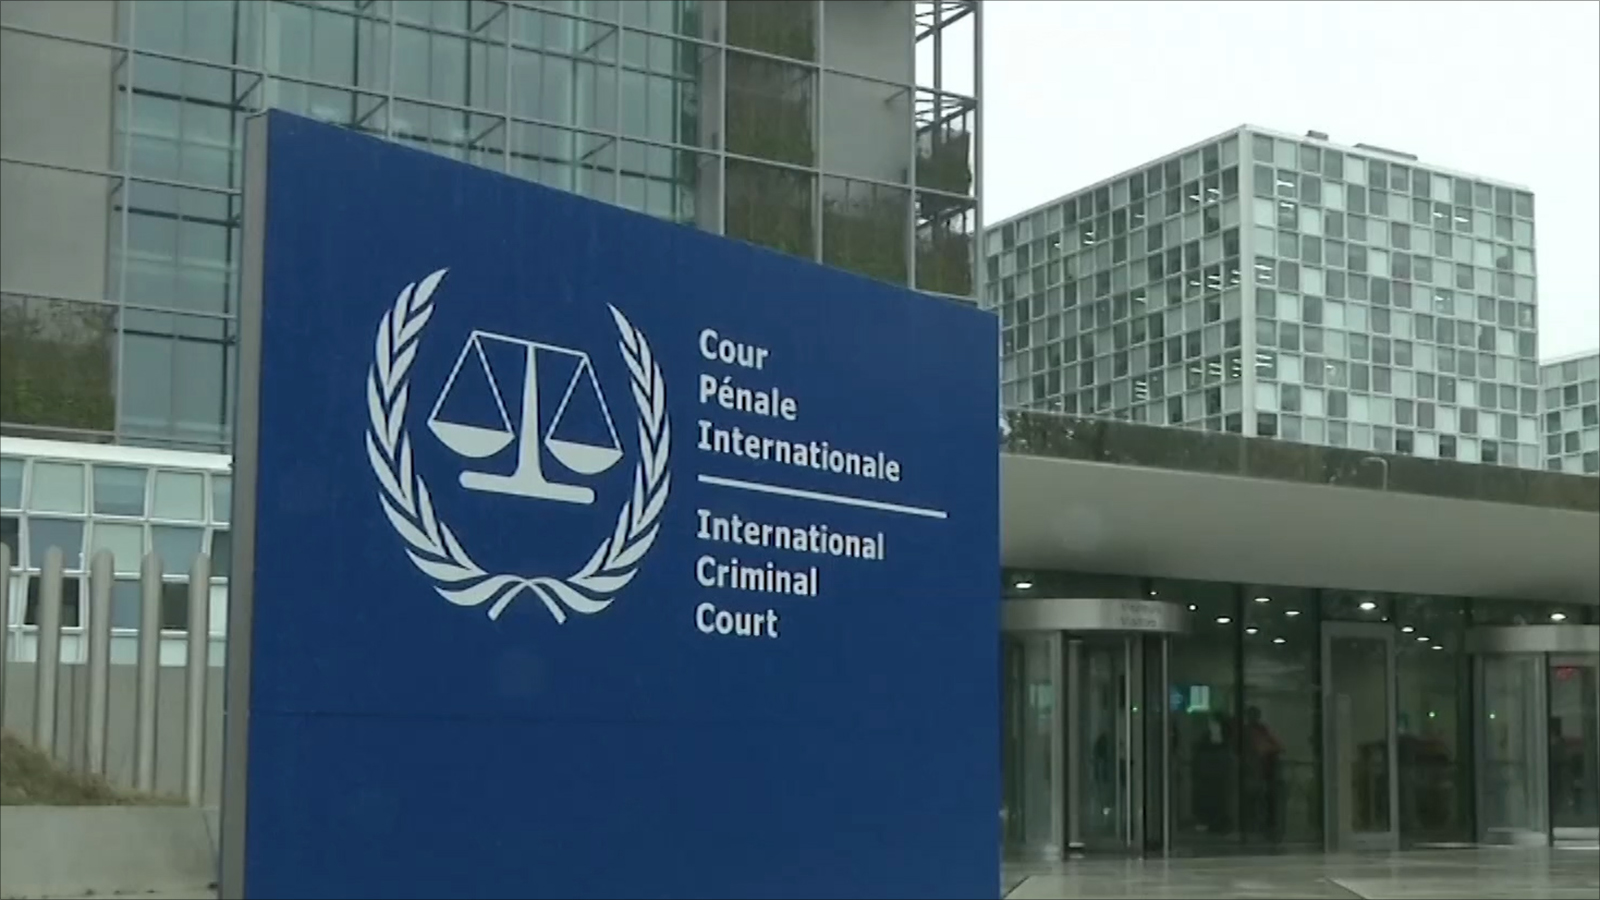 The ICC issues a warning to individuals who threaten to retaliate against it or its employees.